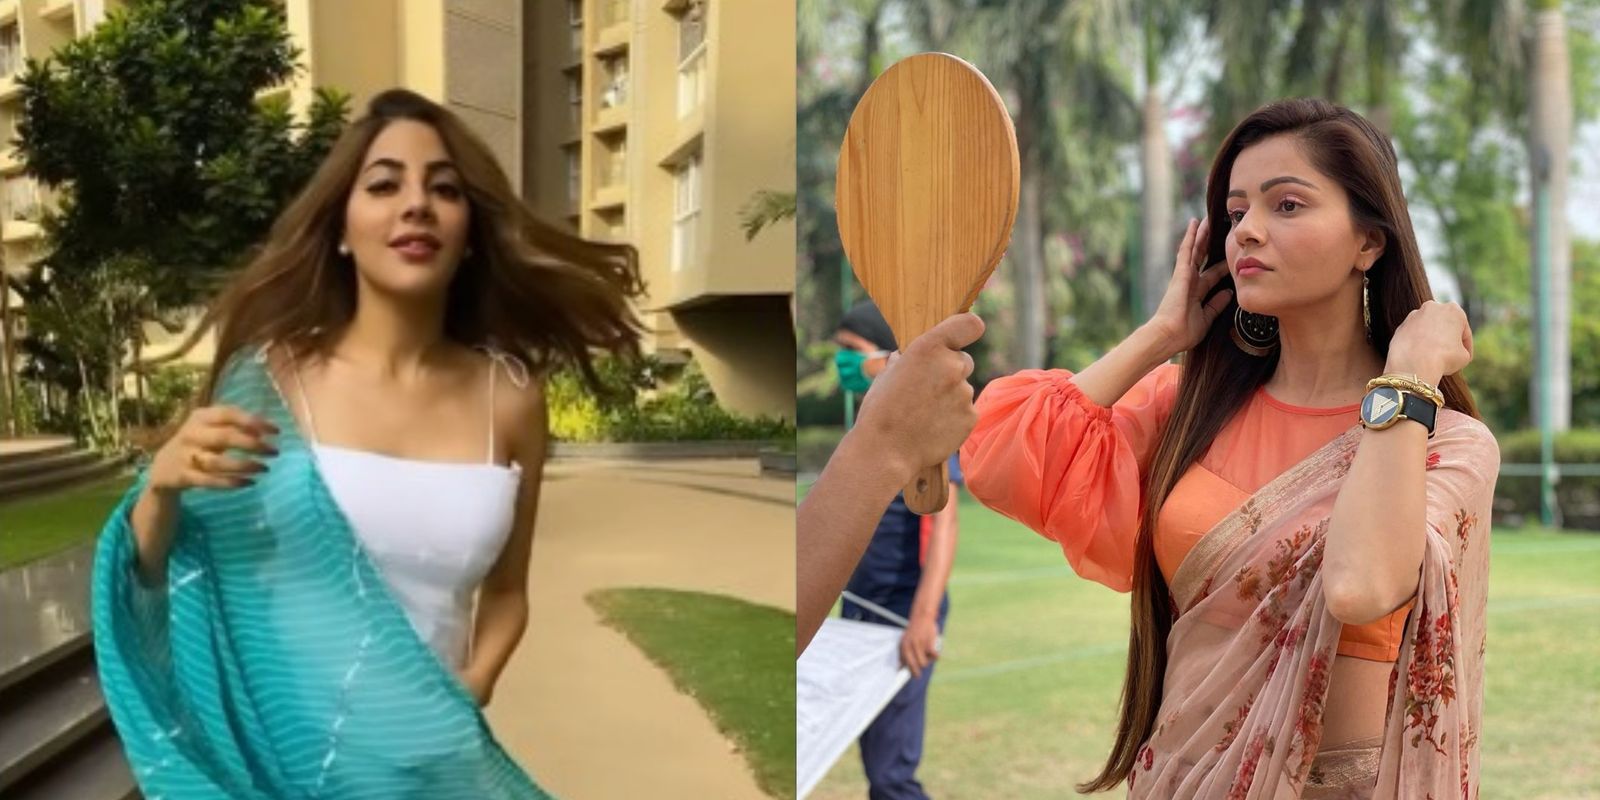 Nikki Tamboli Adds A Desi Twist To Her Outfit; Rubina Dilaik Shares Behind The Scene Snaps From Her Shoot